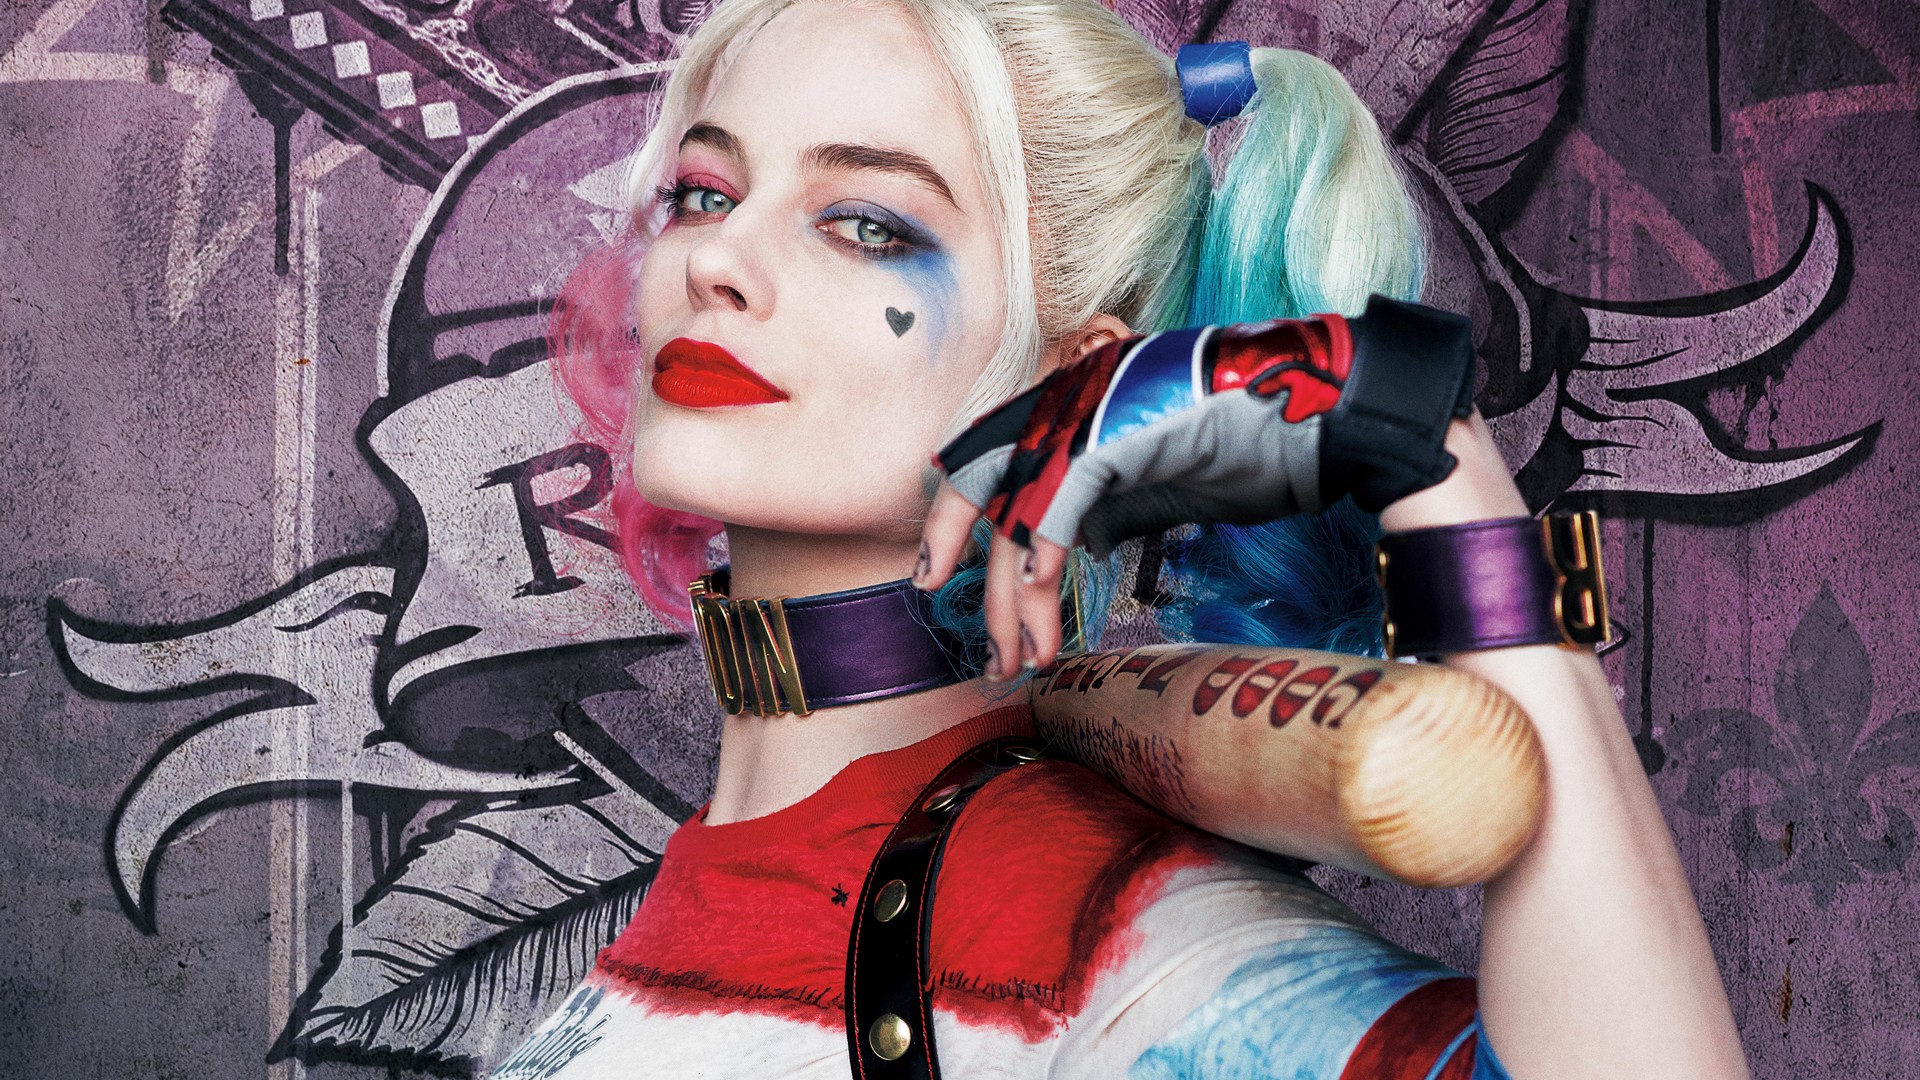 Wallpaper Harley Quinn with resolution 1920X1080 pixel. You can use this wallpaper as background for your desktop Computer Screensavers, Android or iPhone smartphones